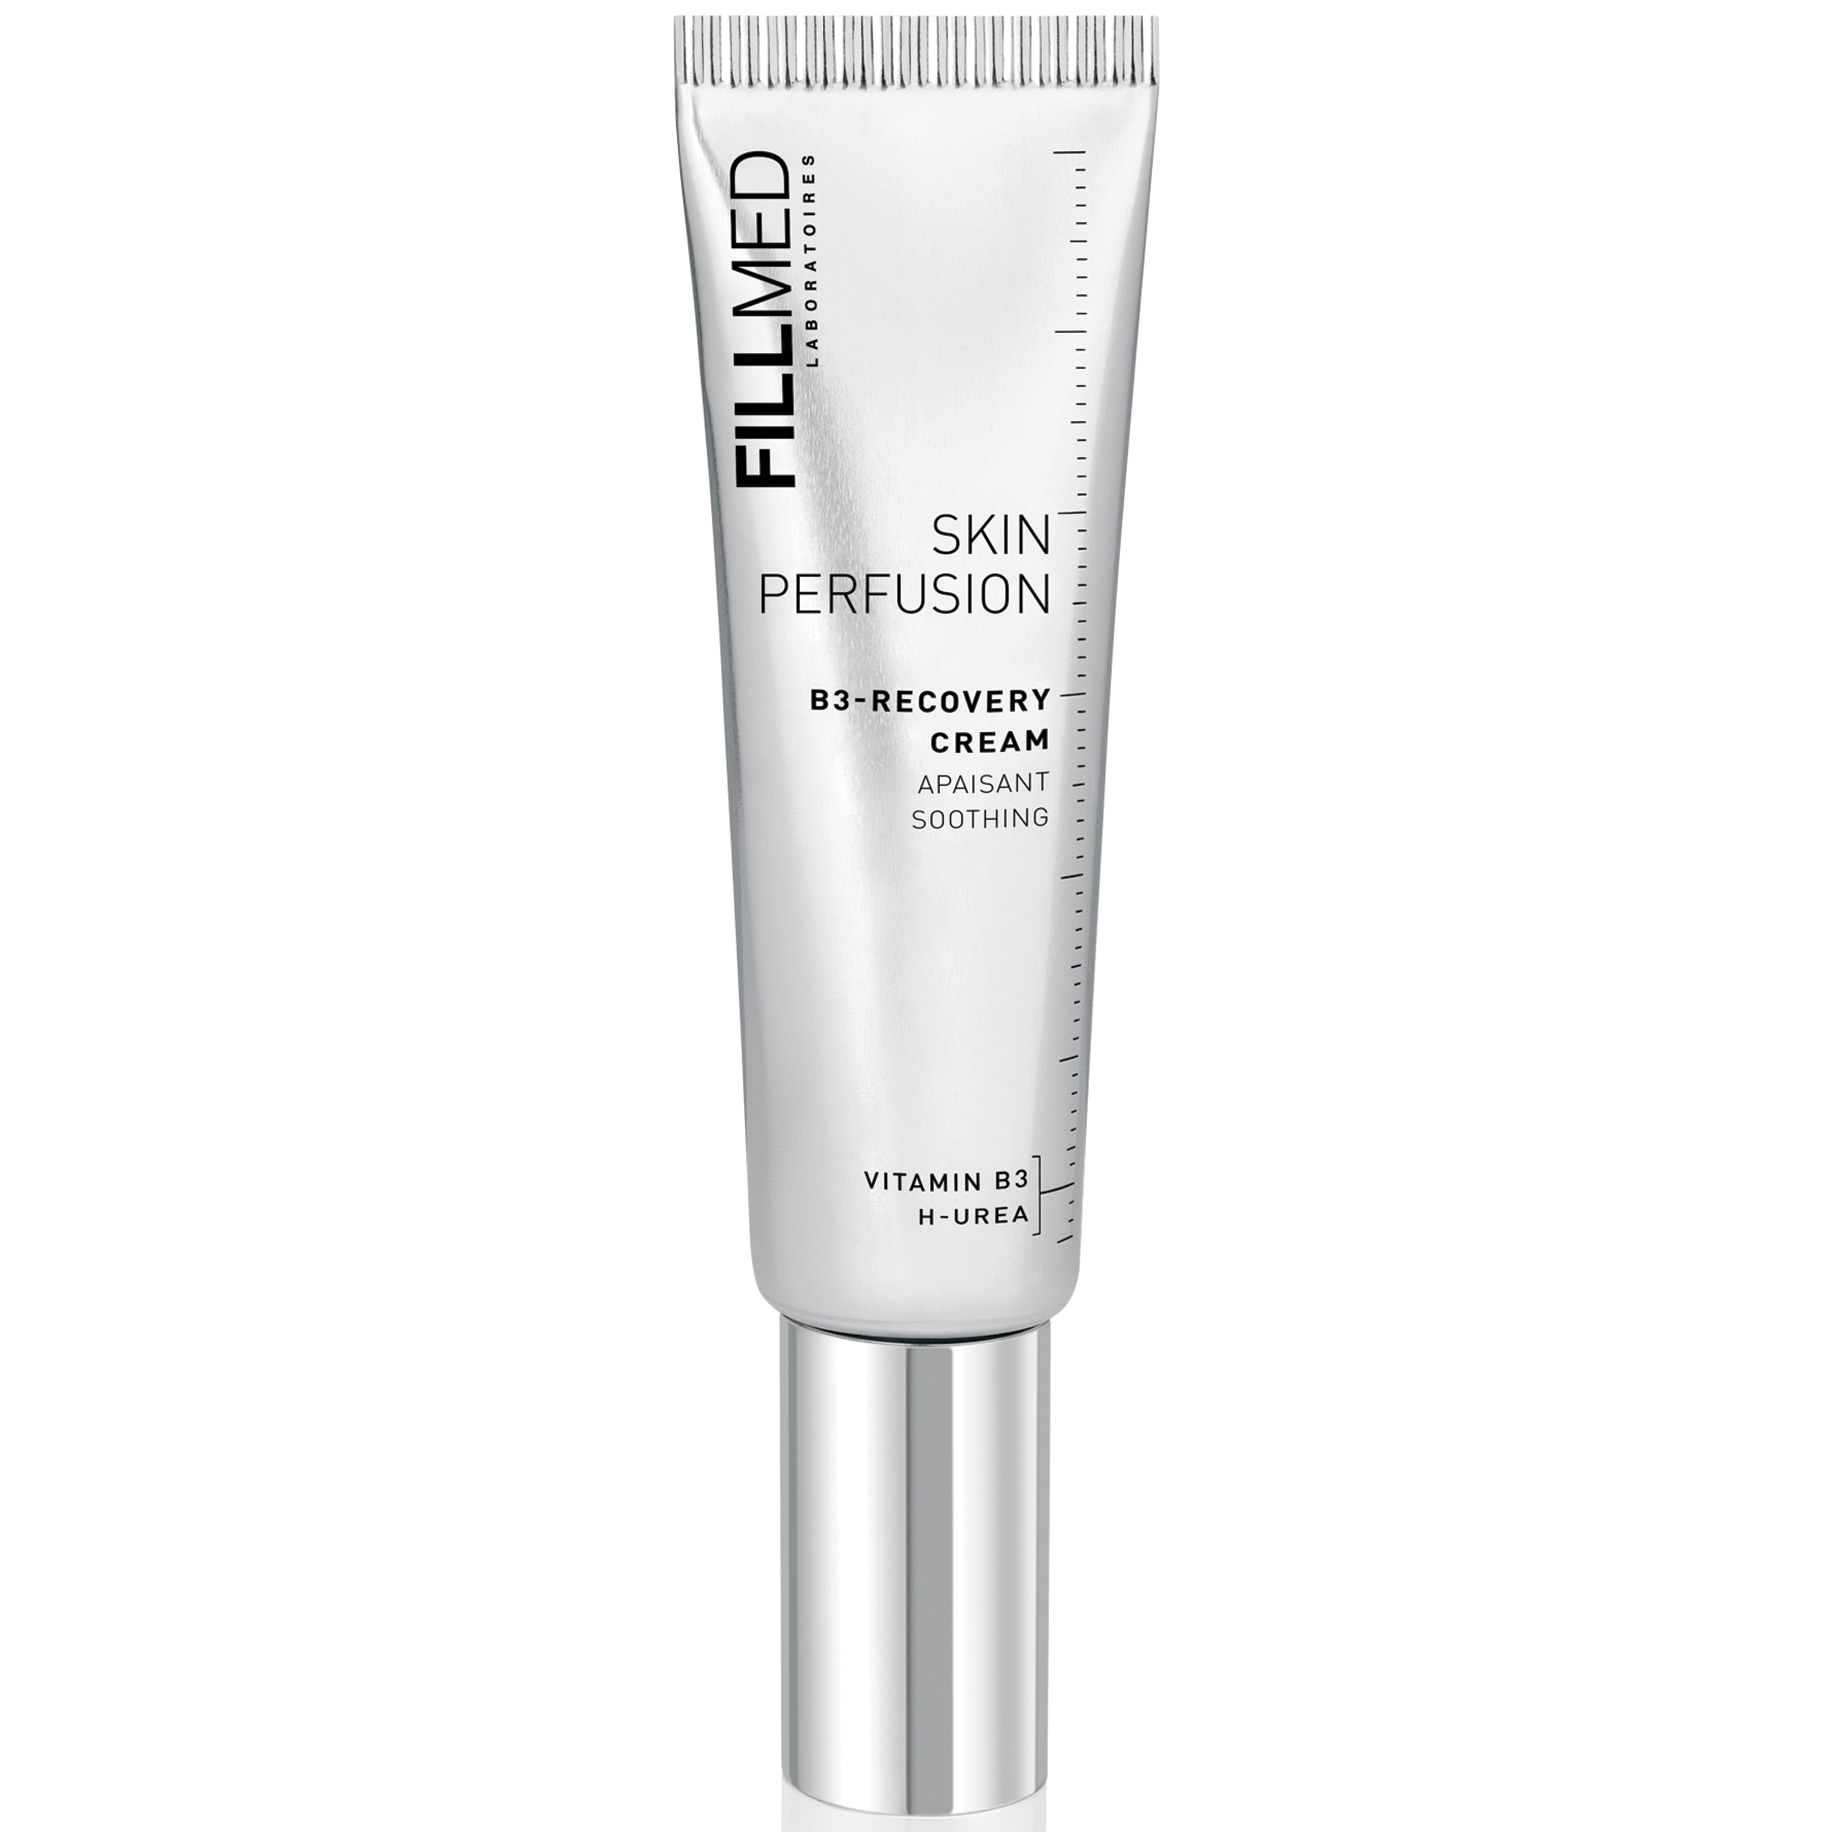 Fillmed Skin Perfusion B3-Recovery Cream 